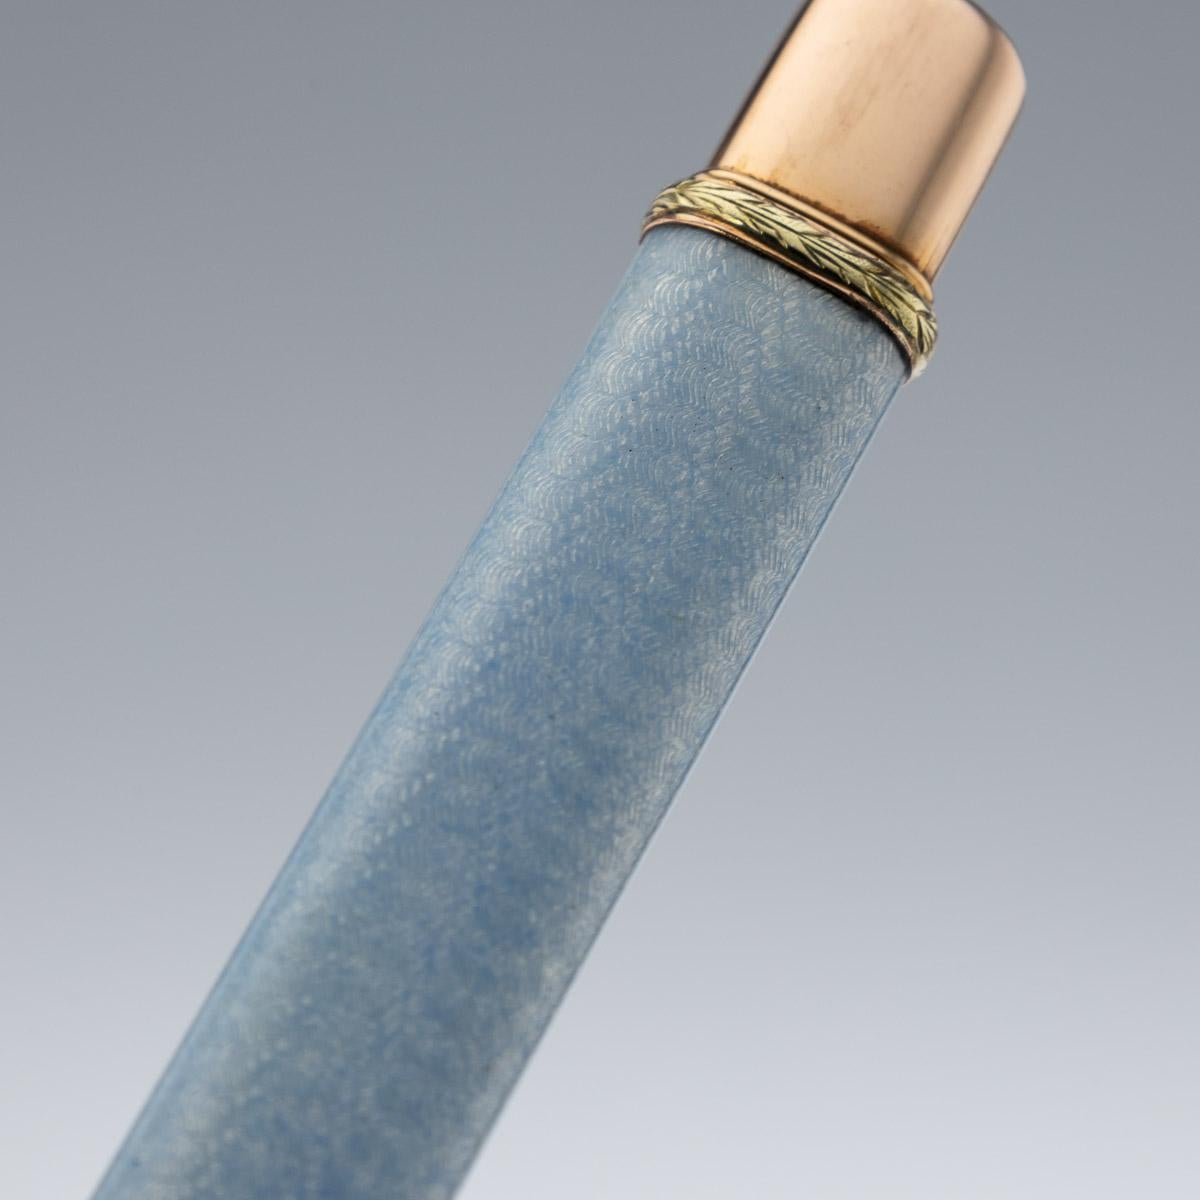 20th Century Russian Faberge Two-Colour Gold-Mounted Enamel Pencil, Adler c.1910 2